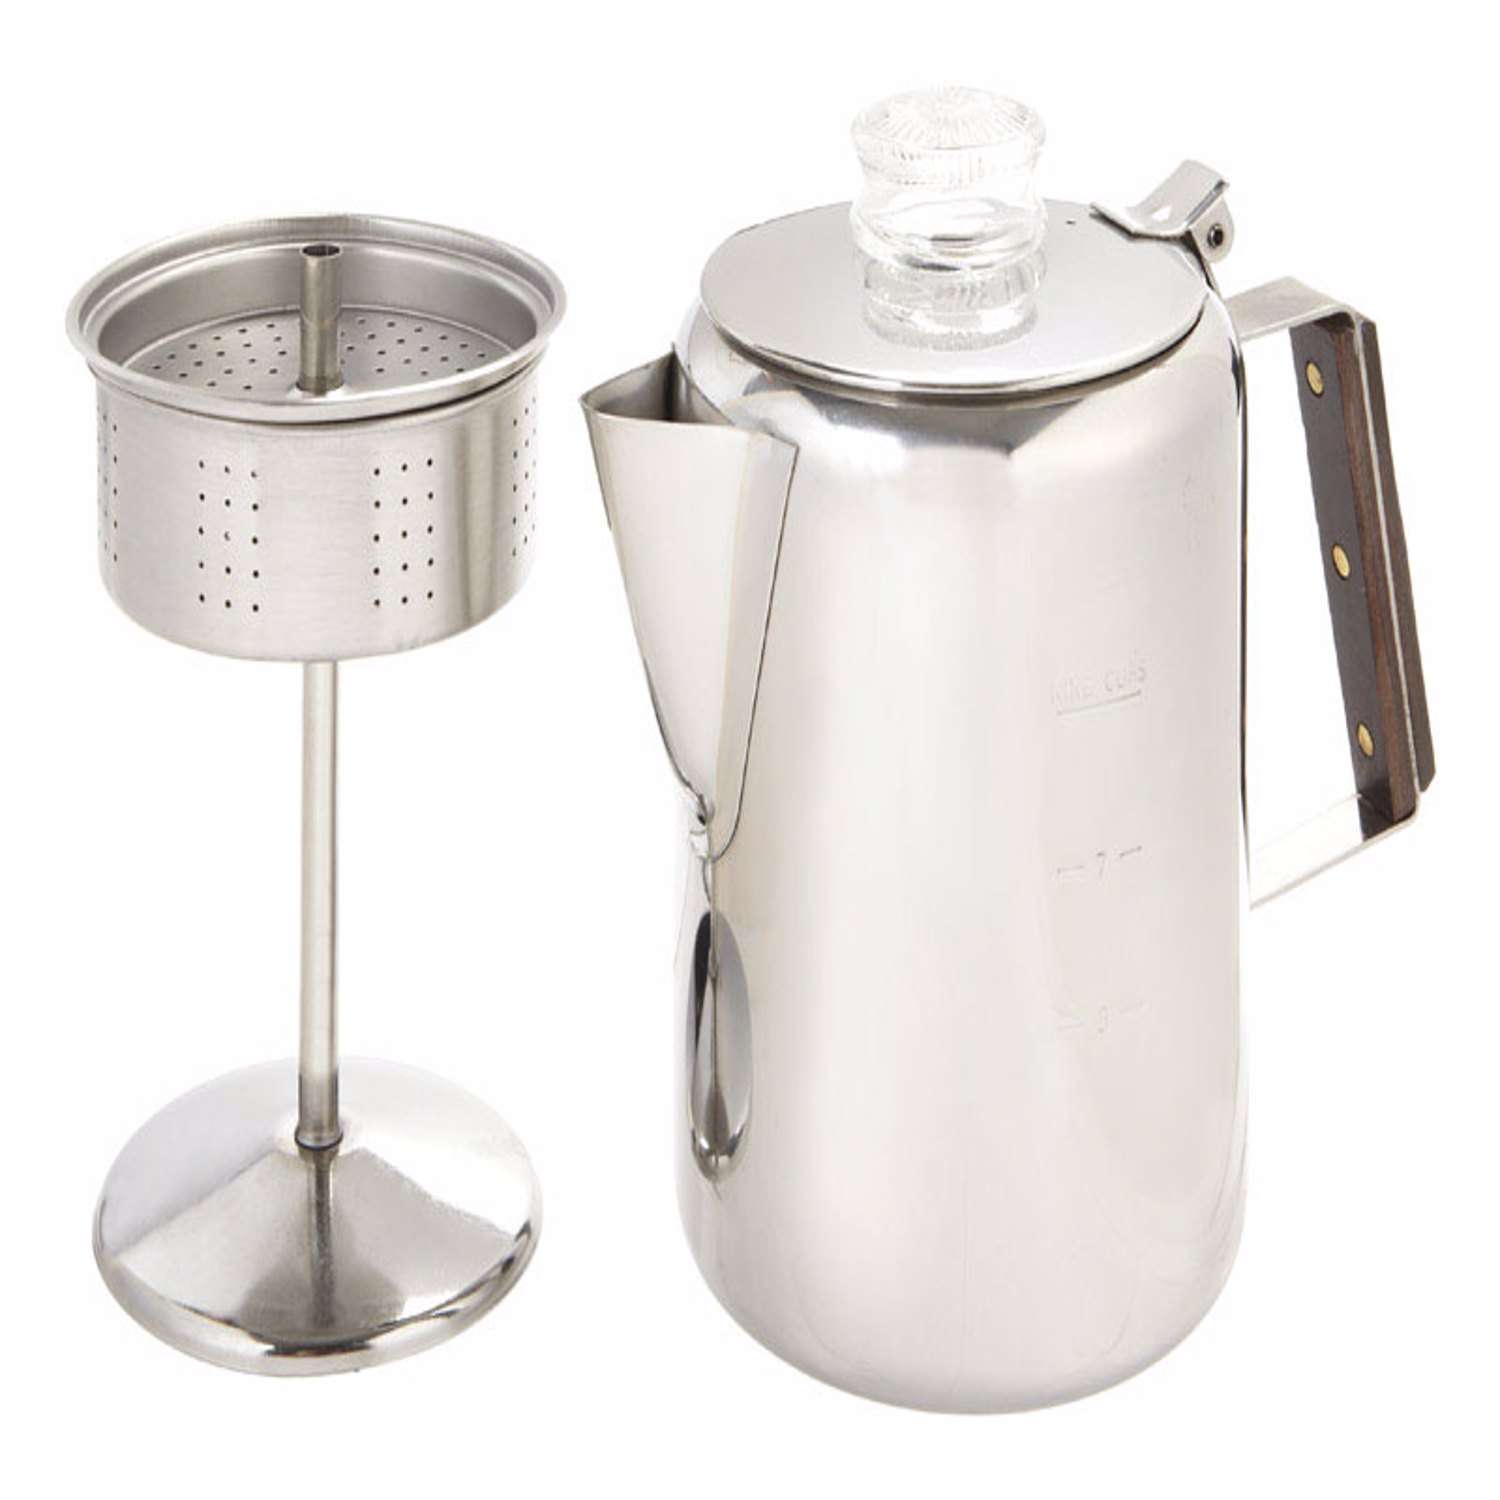 Moss & Stone Electric Coffee Percolator , Camping Coffee Pot Silver Body with Stainless Steel Lids Coffee Maker, Percolator Electric Pot - 10 Cups